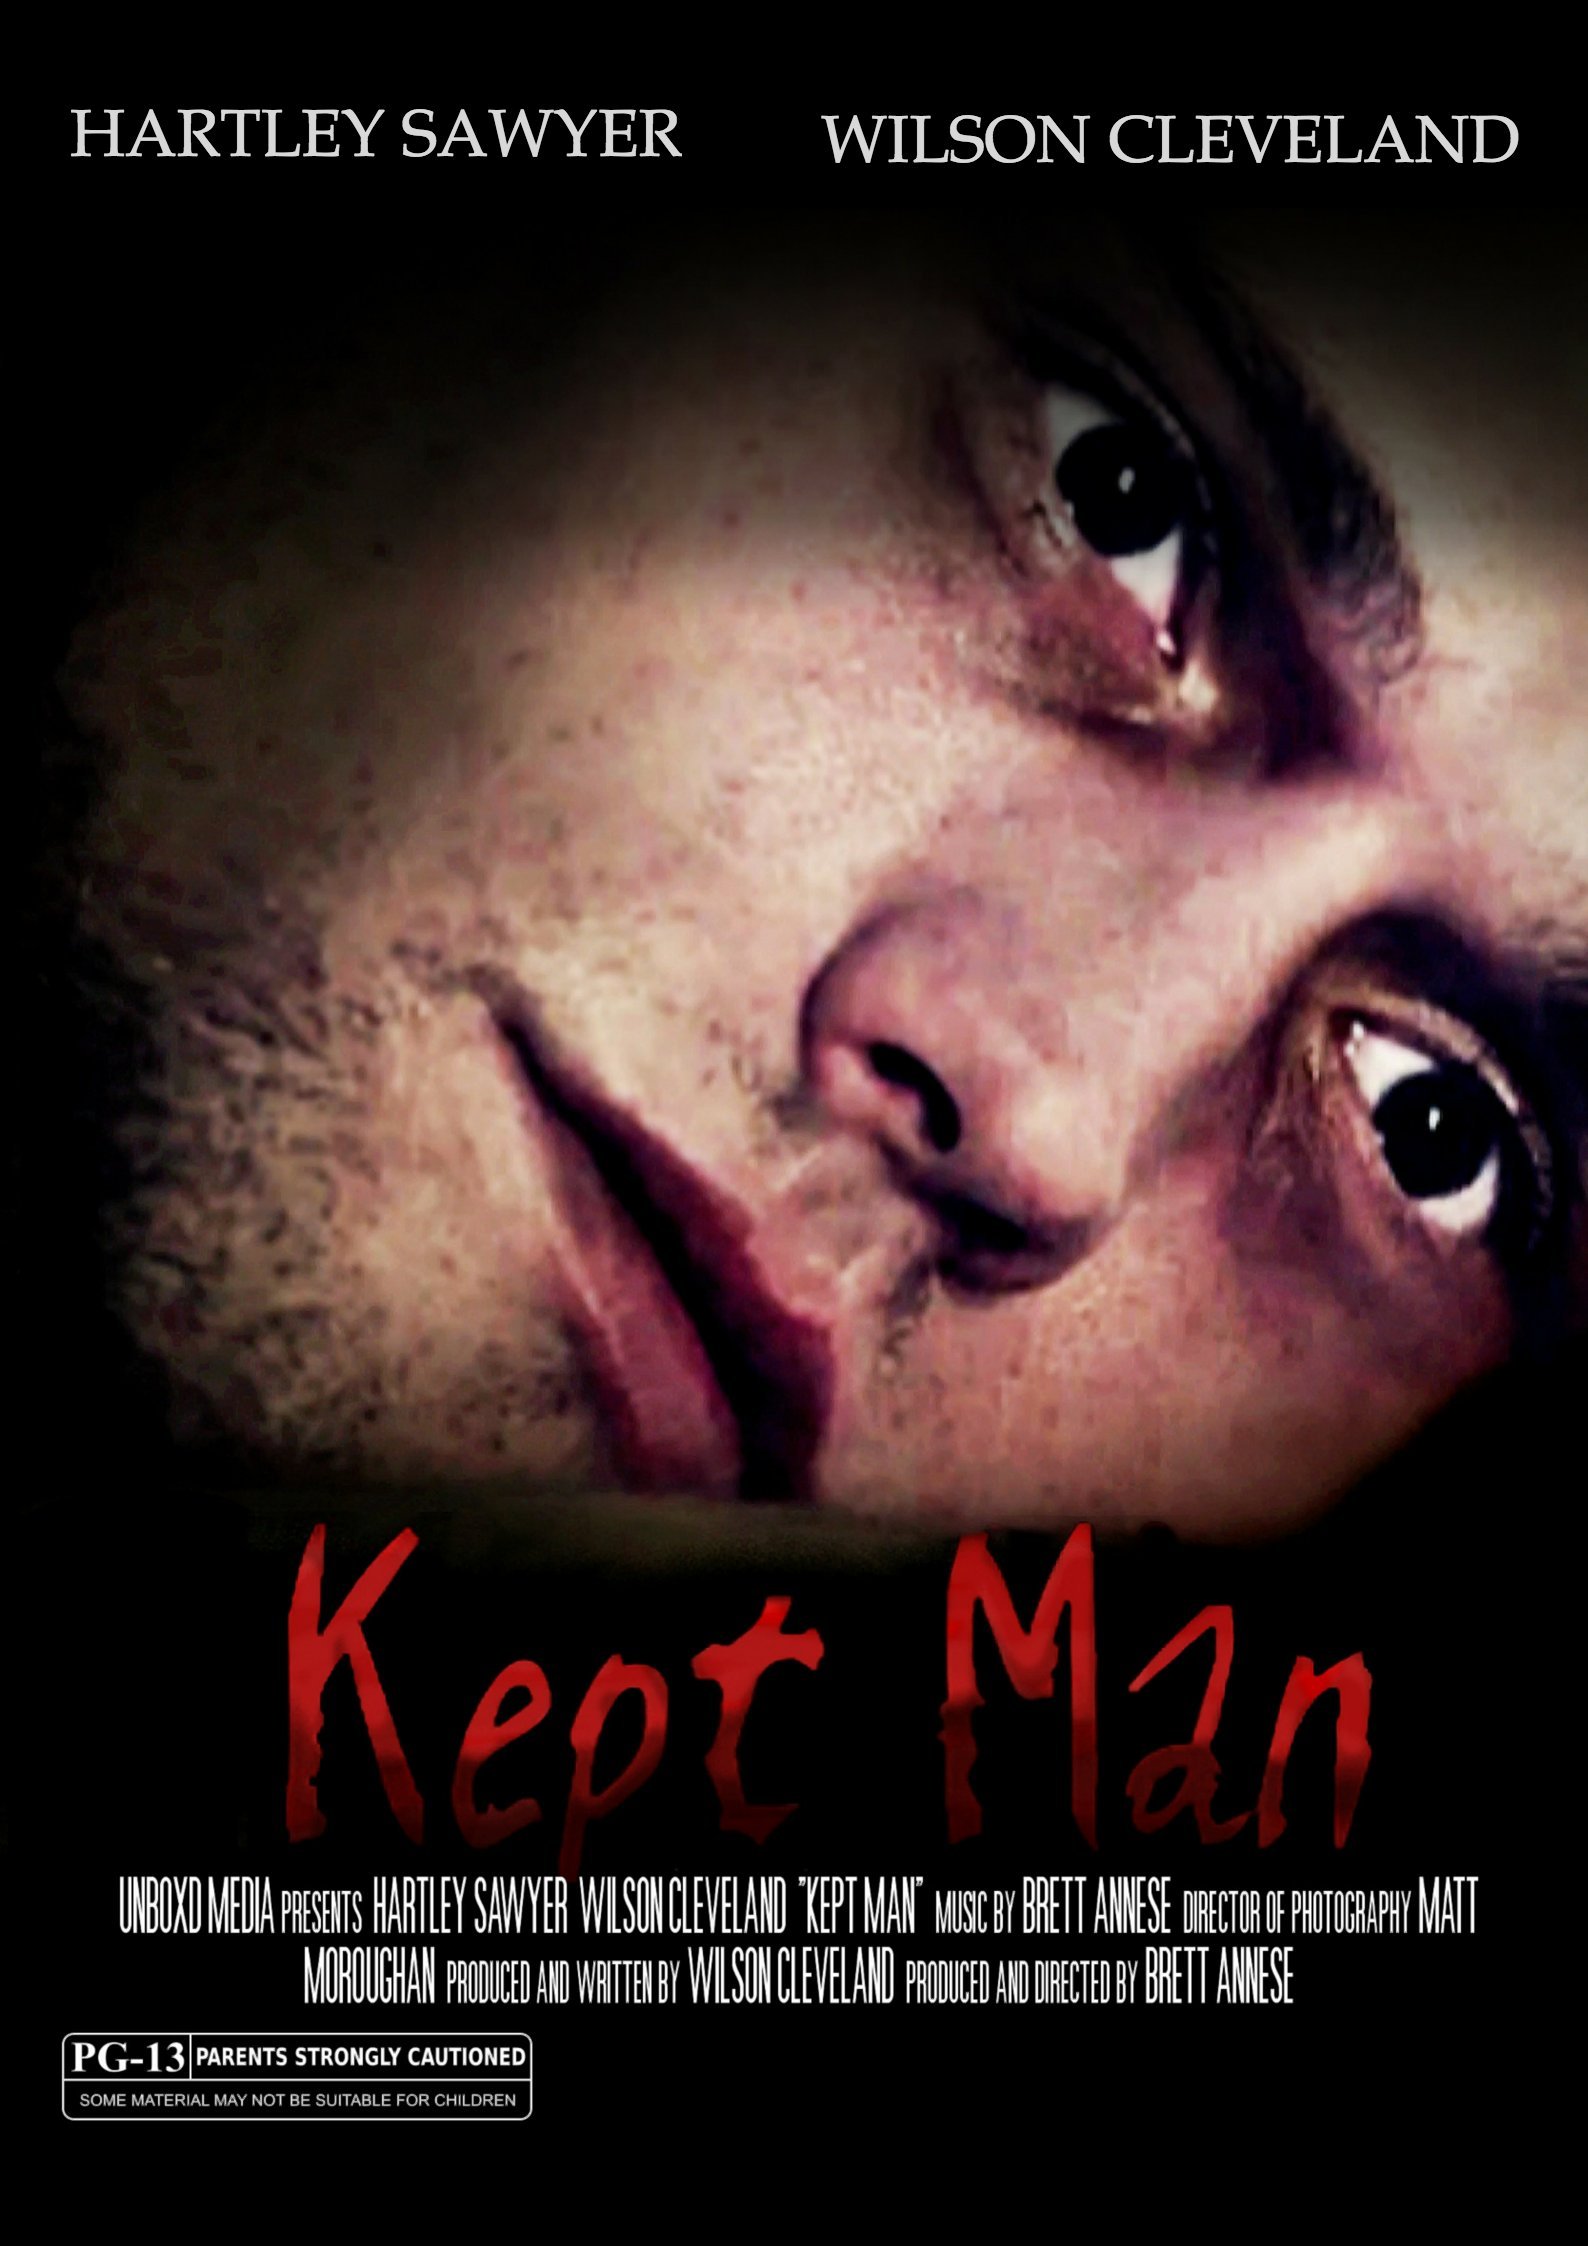 Wilson Cleveland and Hartley Sawyer in Kept Man (2014)